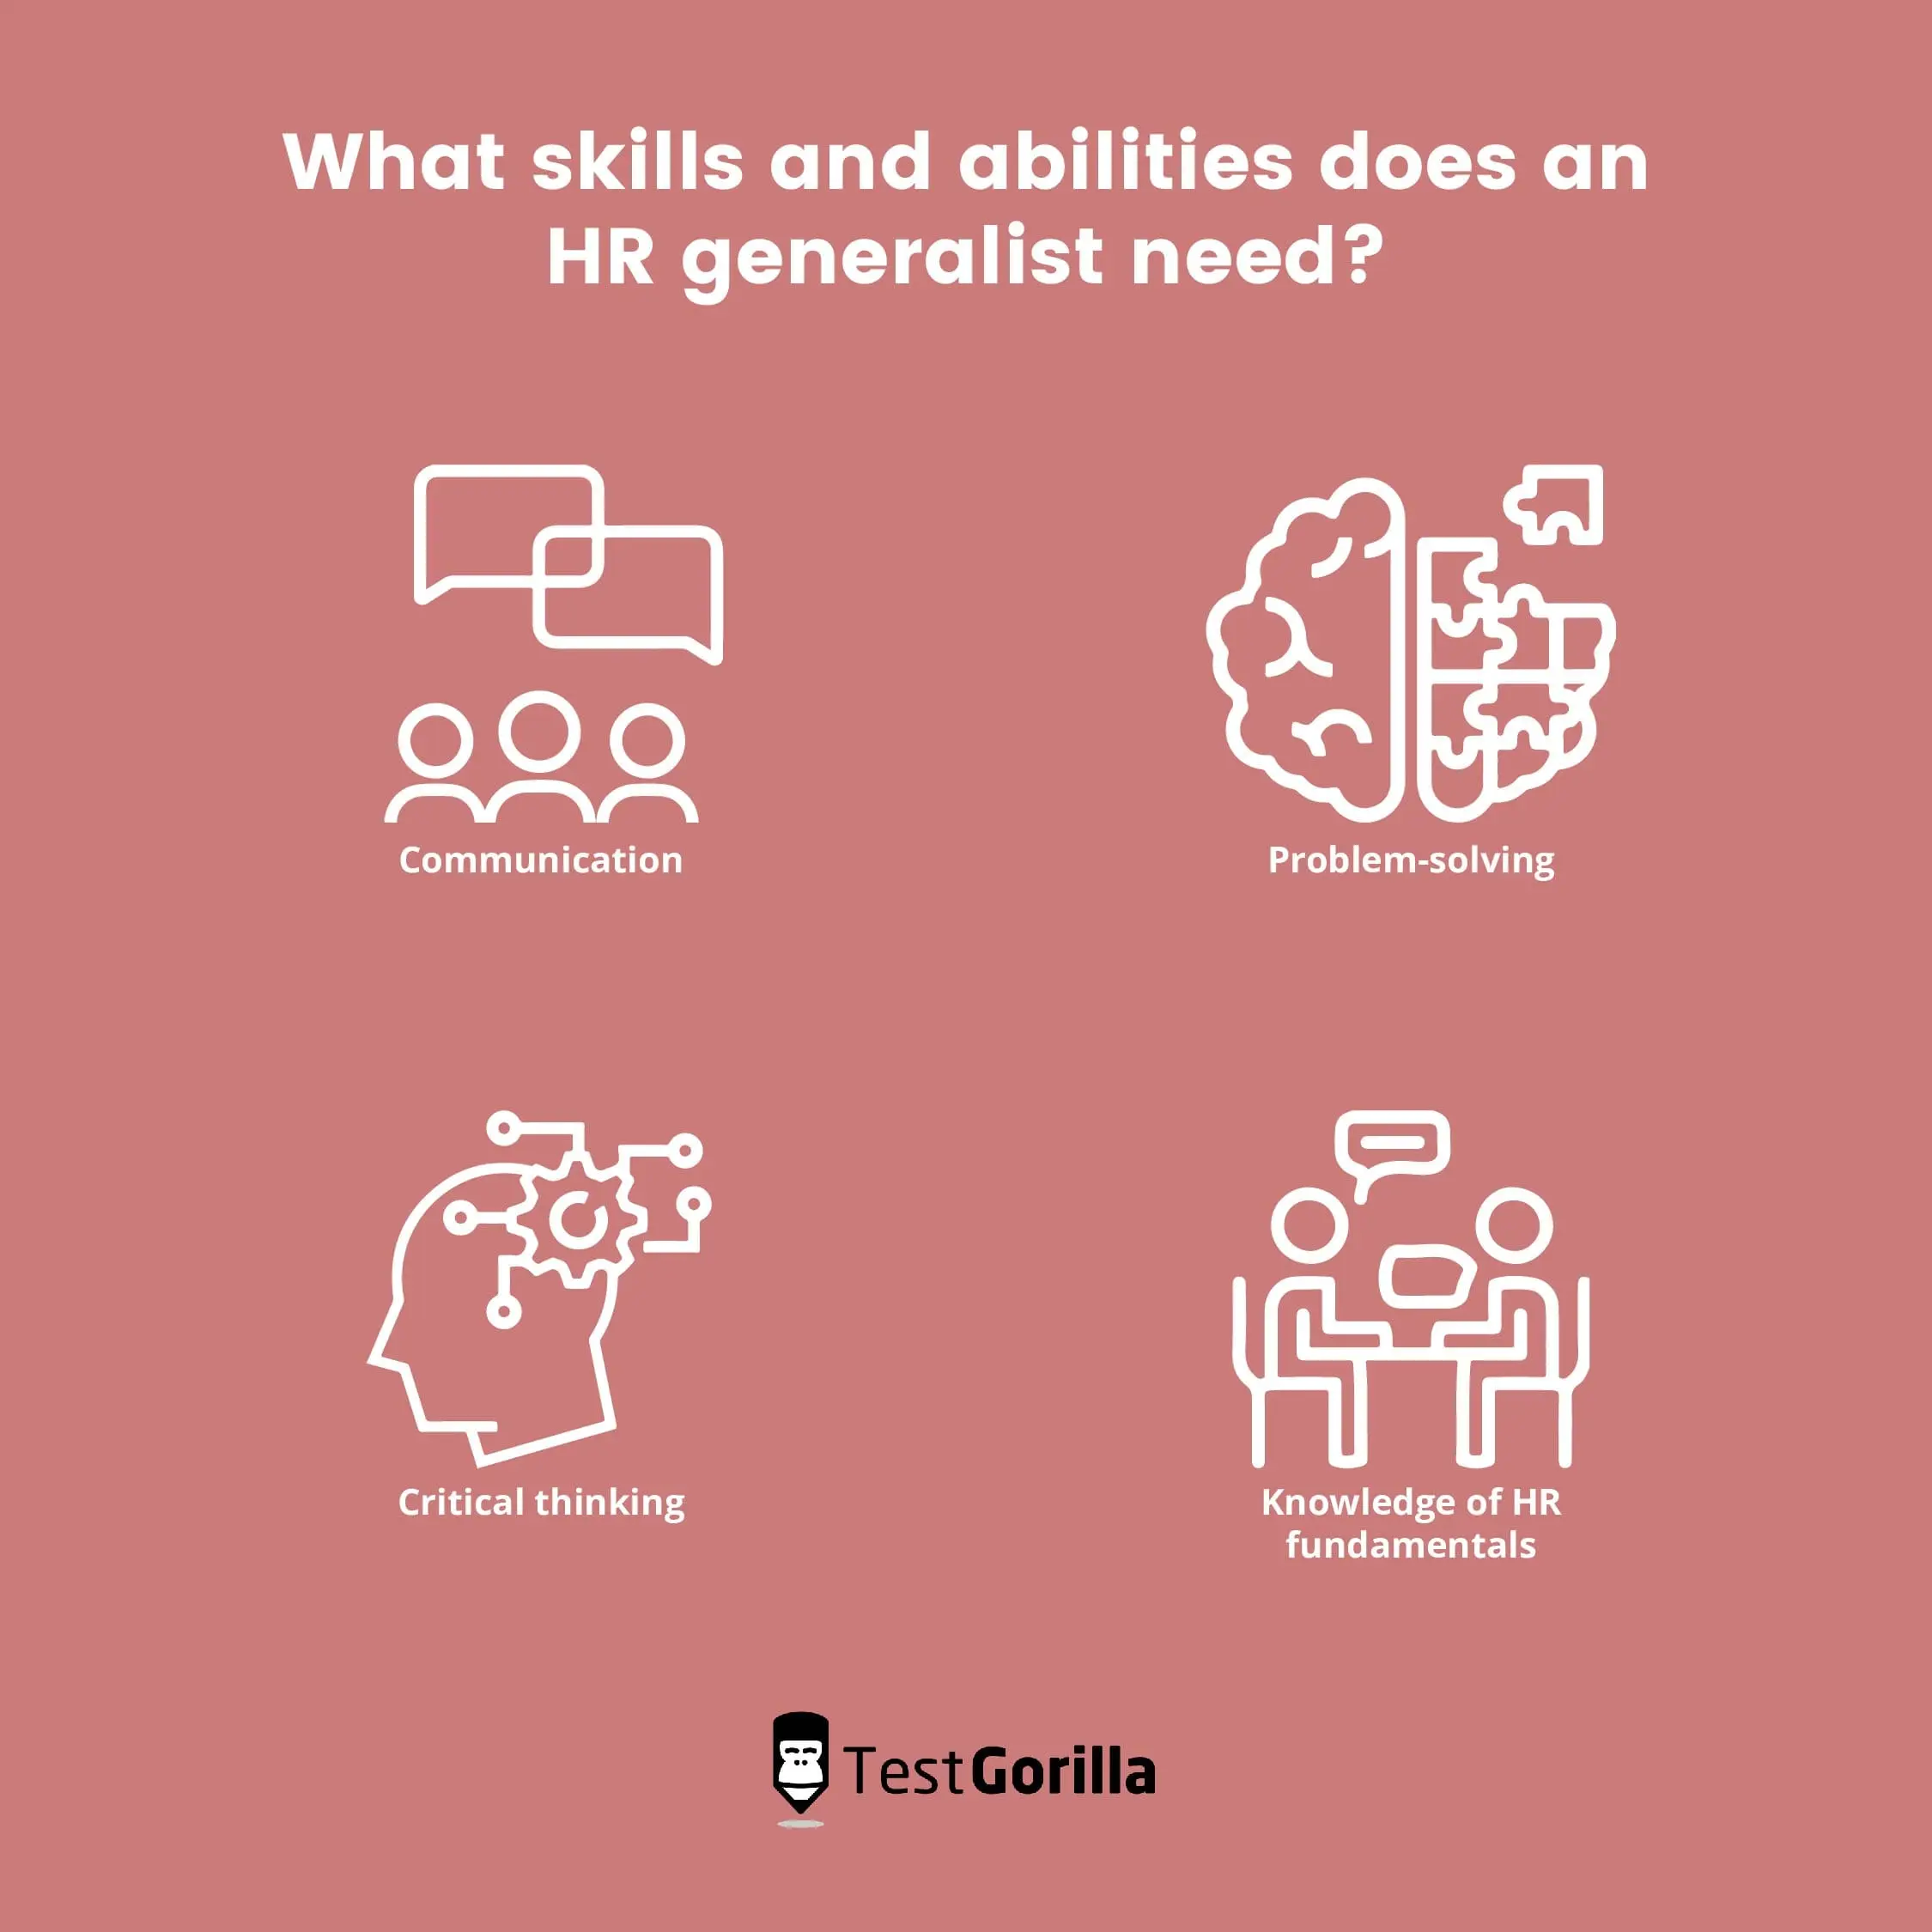 image listing the skills and abilities needed in an HR generalist